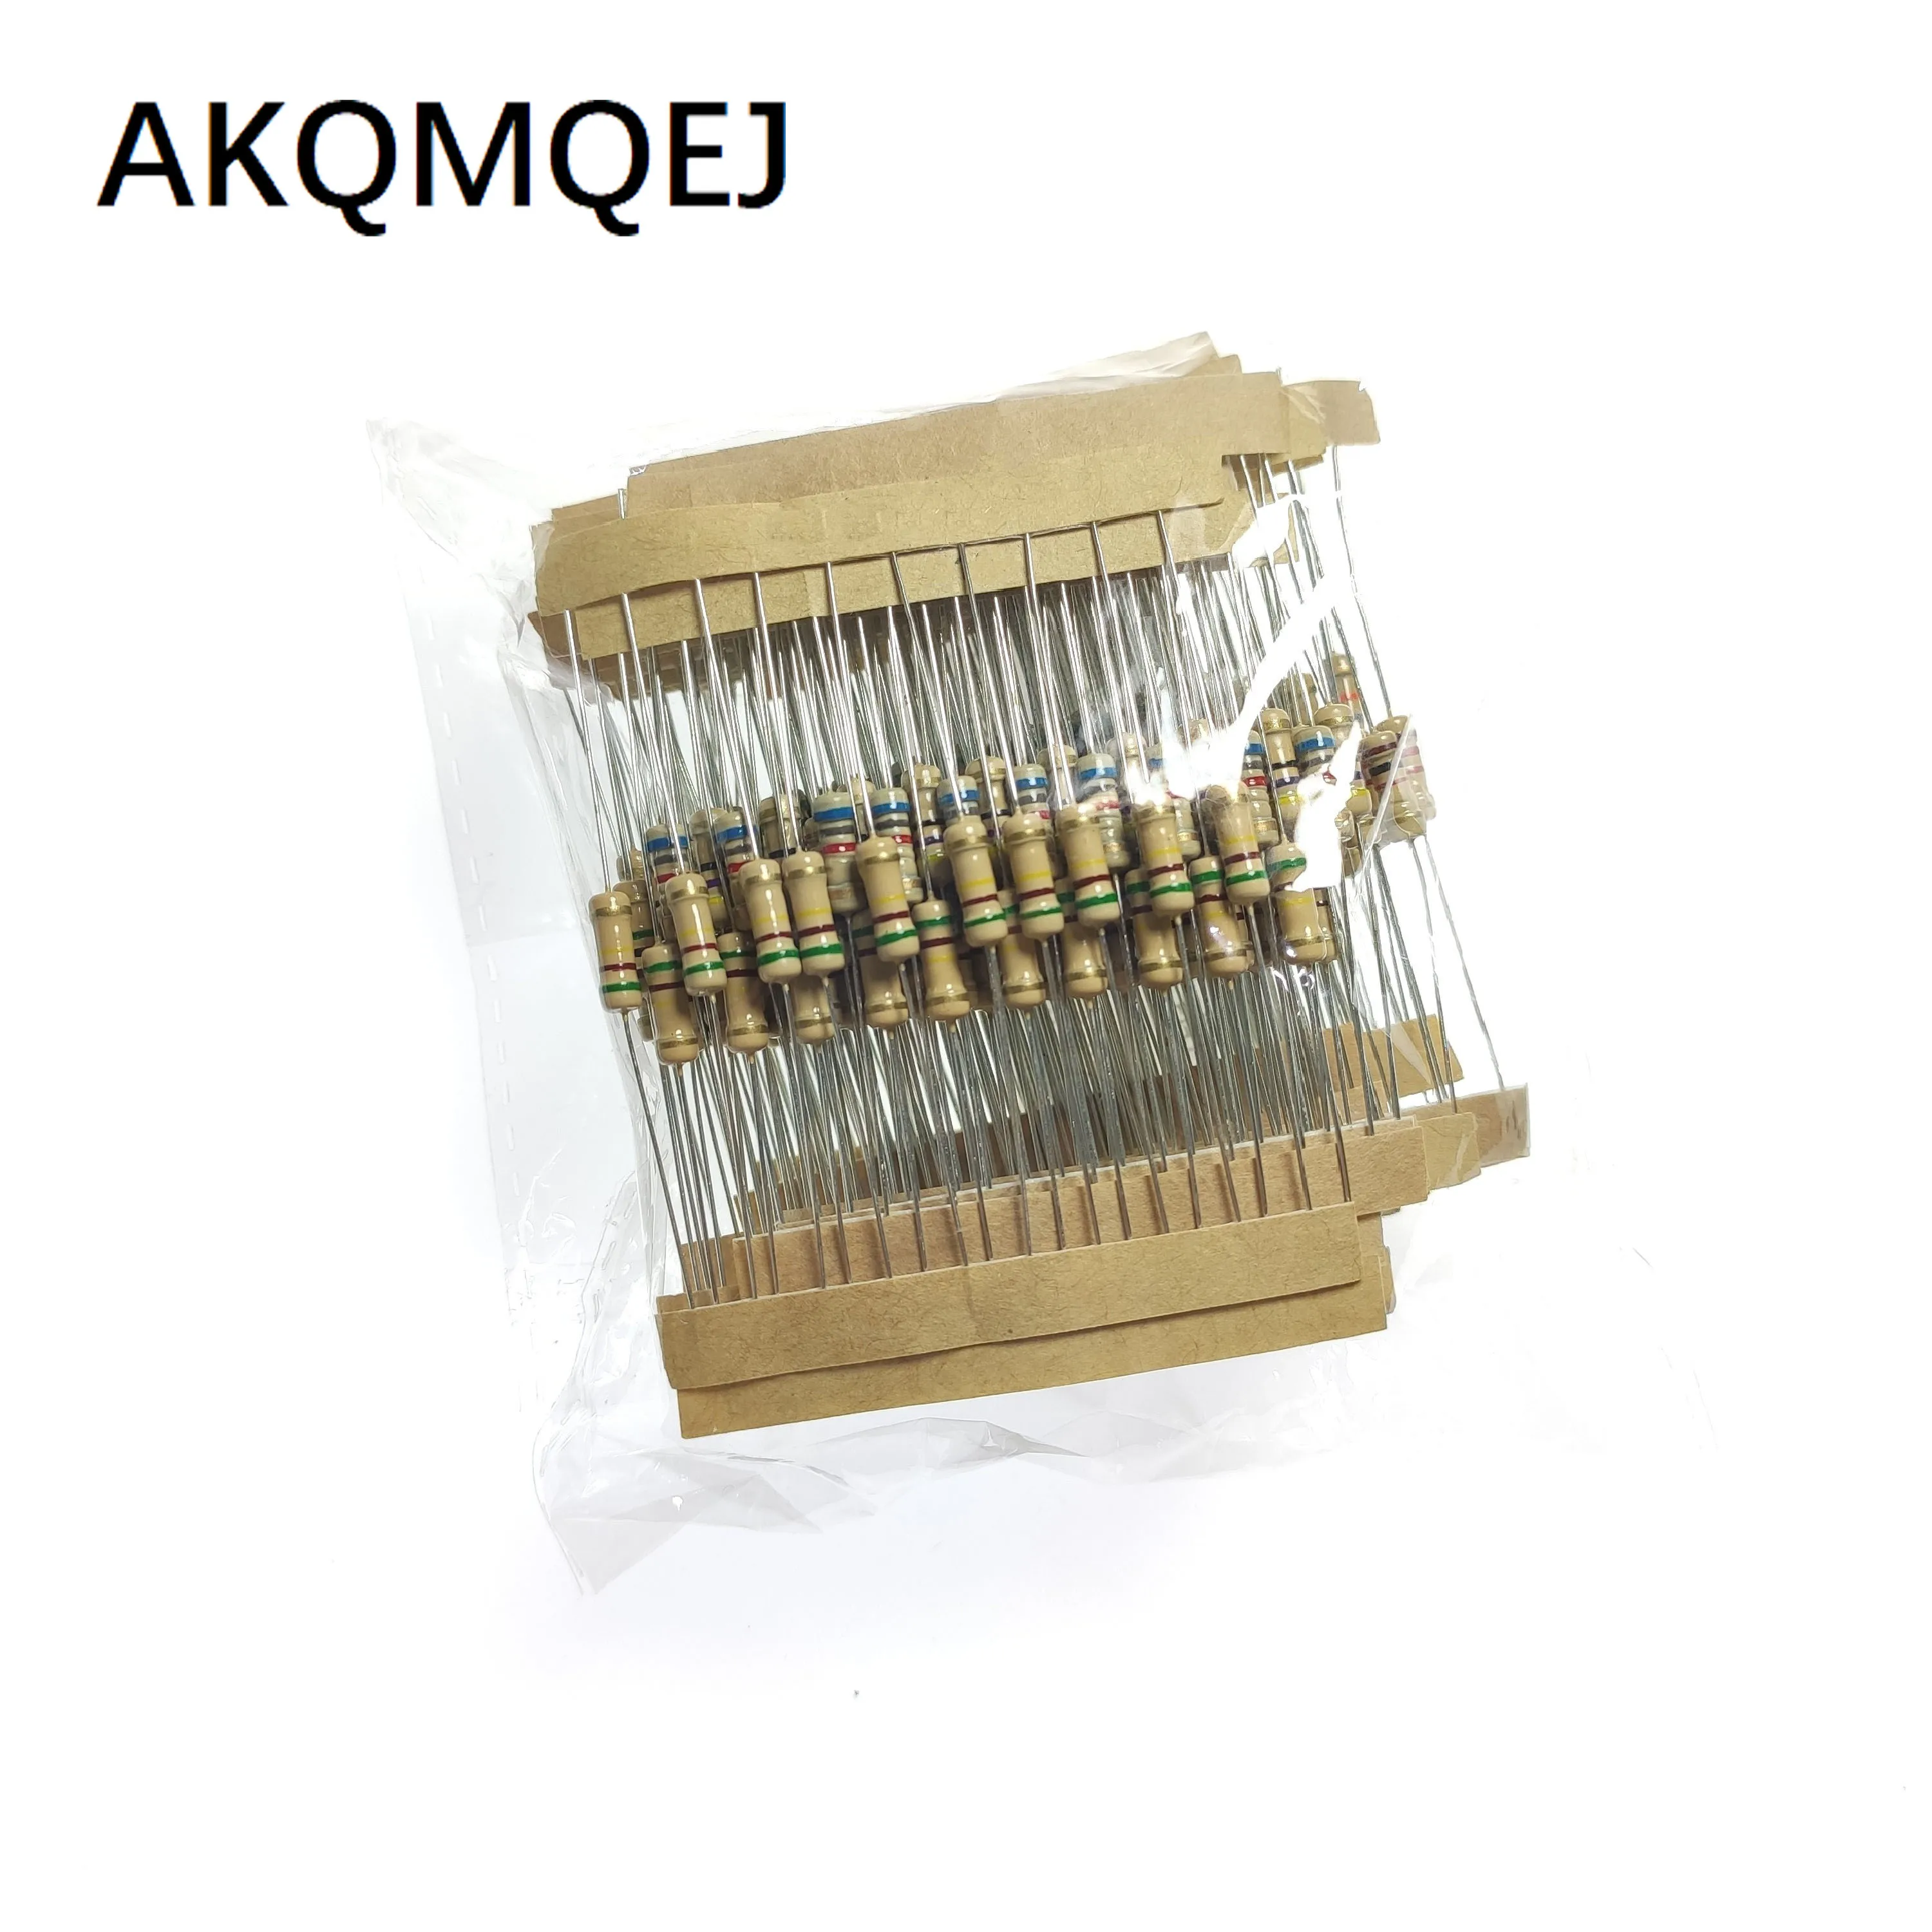 

30 specifications of 1/2W carbon film resistor (1R ohm - 1M ohm) 5%, 10 of each type, 300 PCS in total